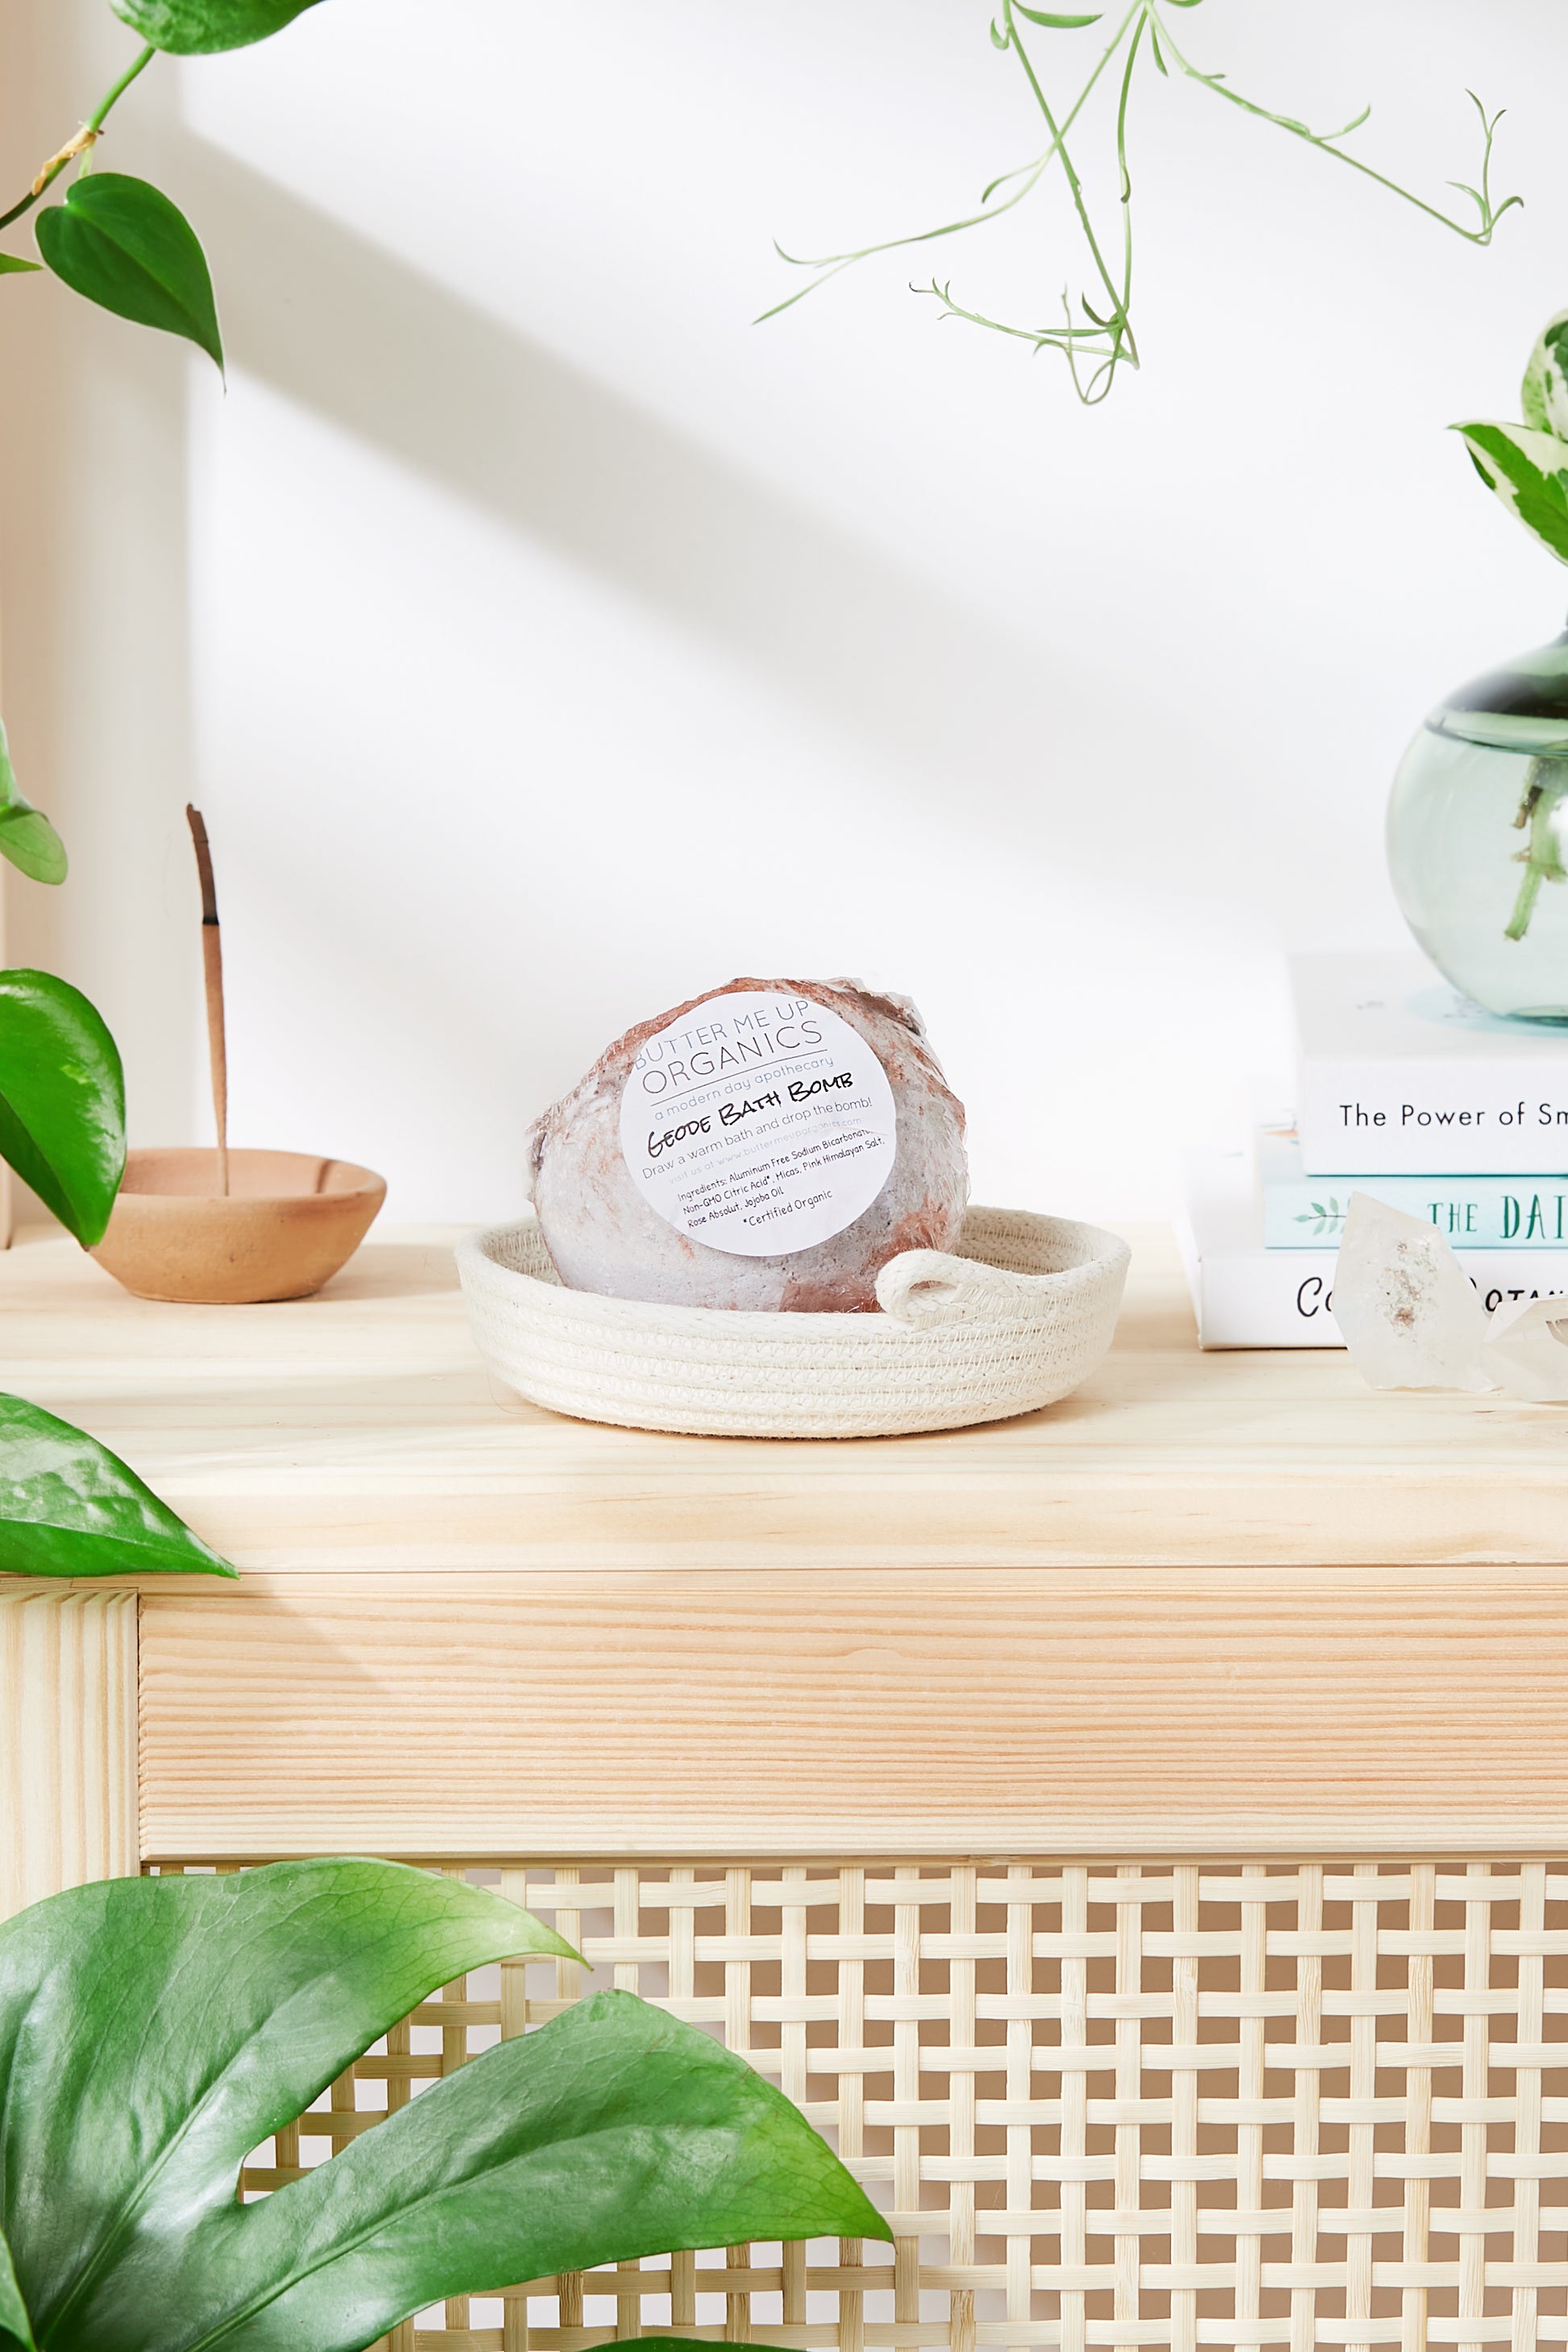 A soap bar labeled "Organic Geode Bath Bombs" from White Smokey rests on a woven dish atop a light wooden surface. Surrounding items include books, a small plant, and an incense holder with Himalayan salt, set against a white background with greenery.